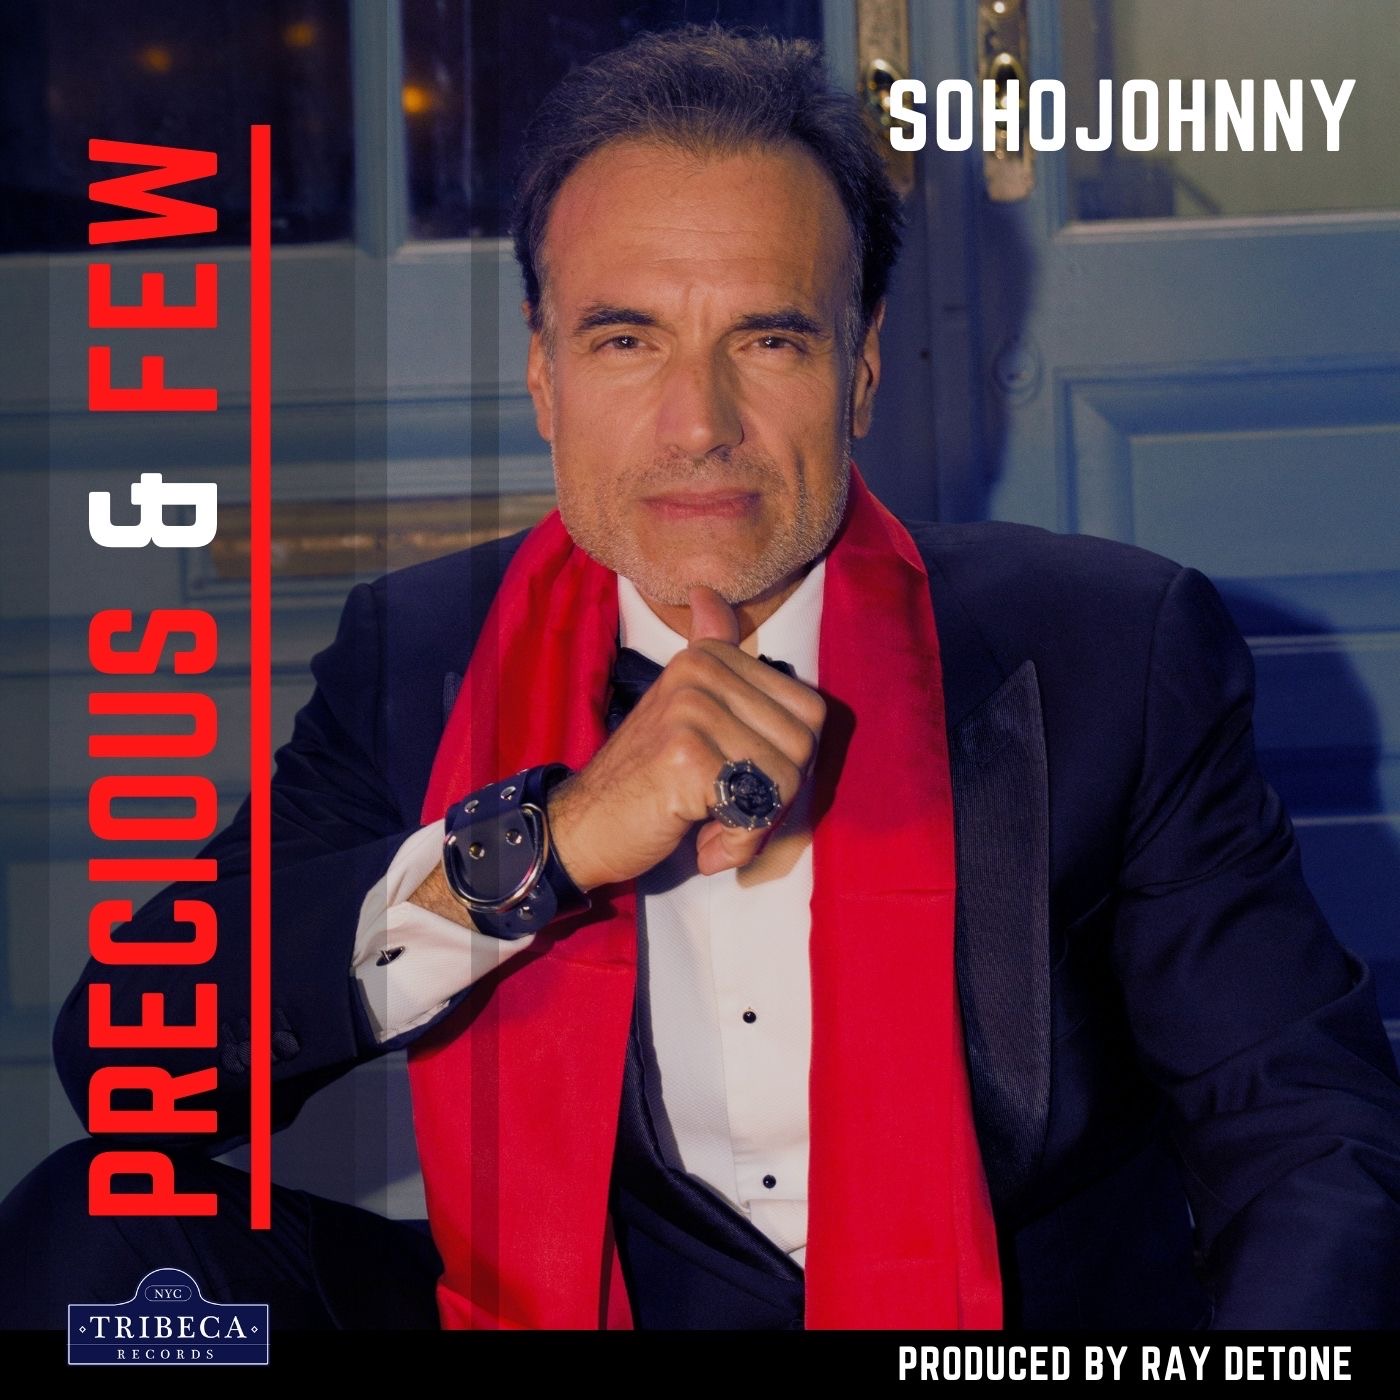 SohoJohnny Releases Music Video For Debut Single “Precious & Few” Just In Time For Valentine’s Day